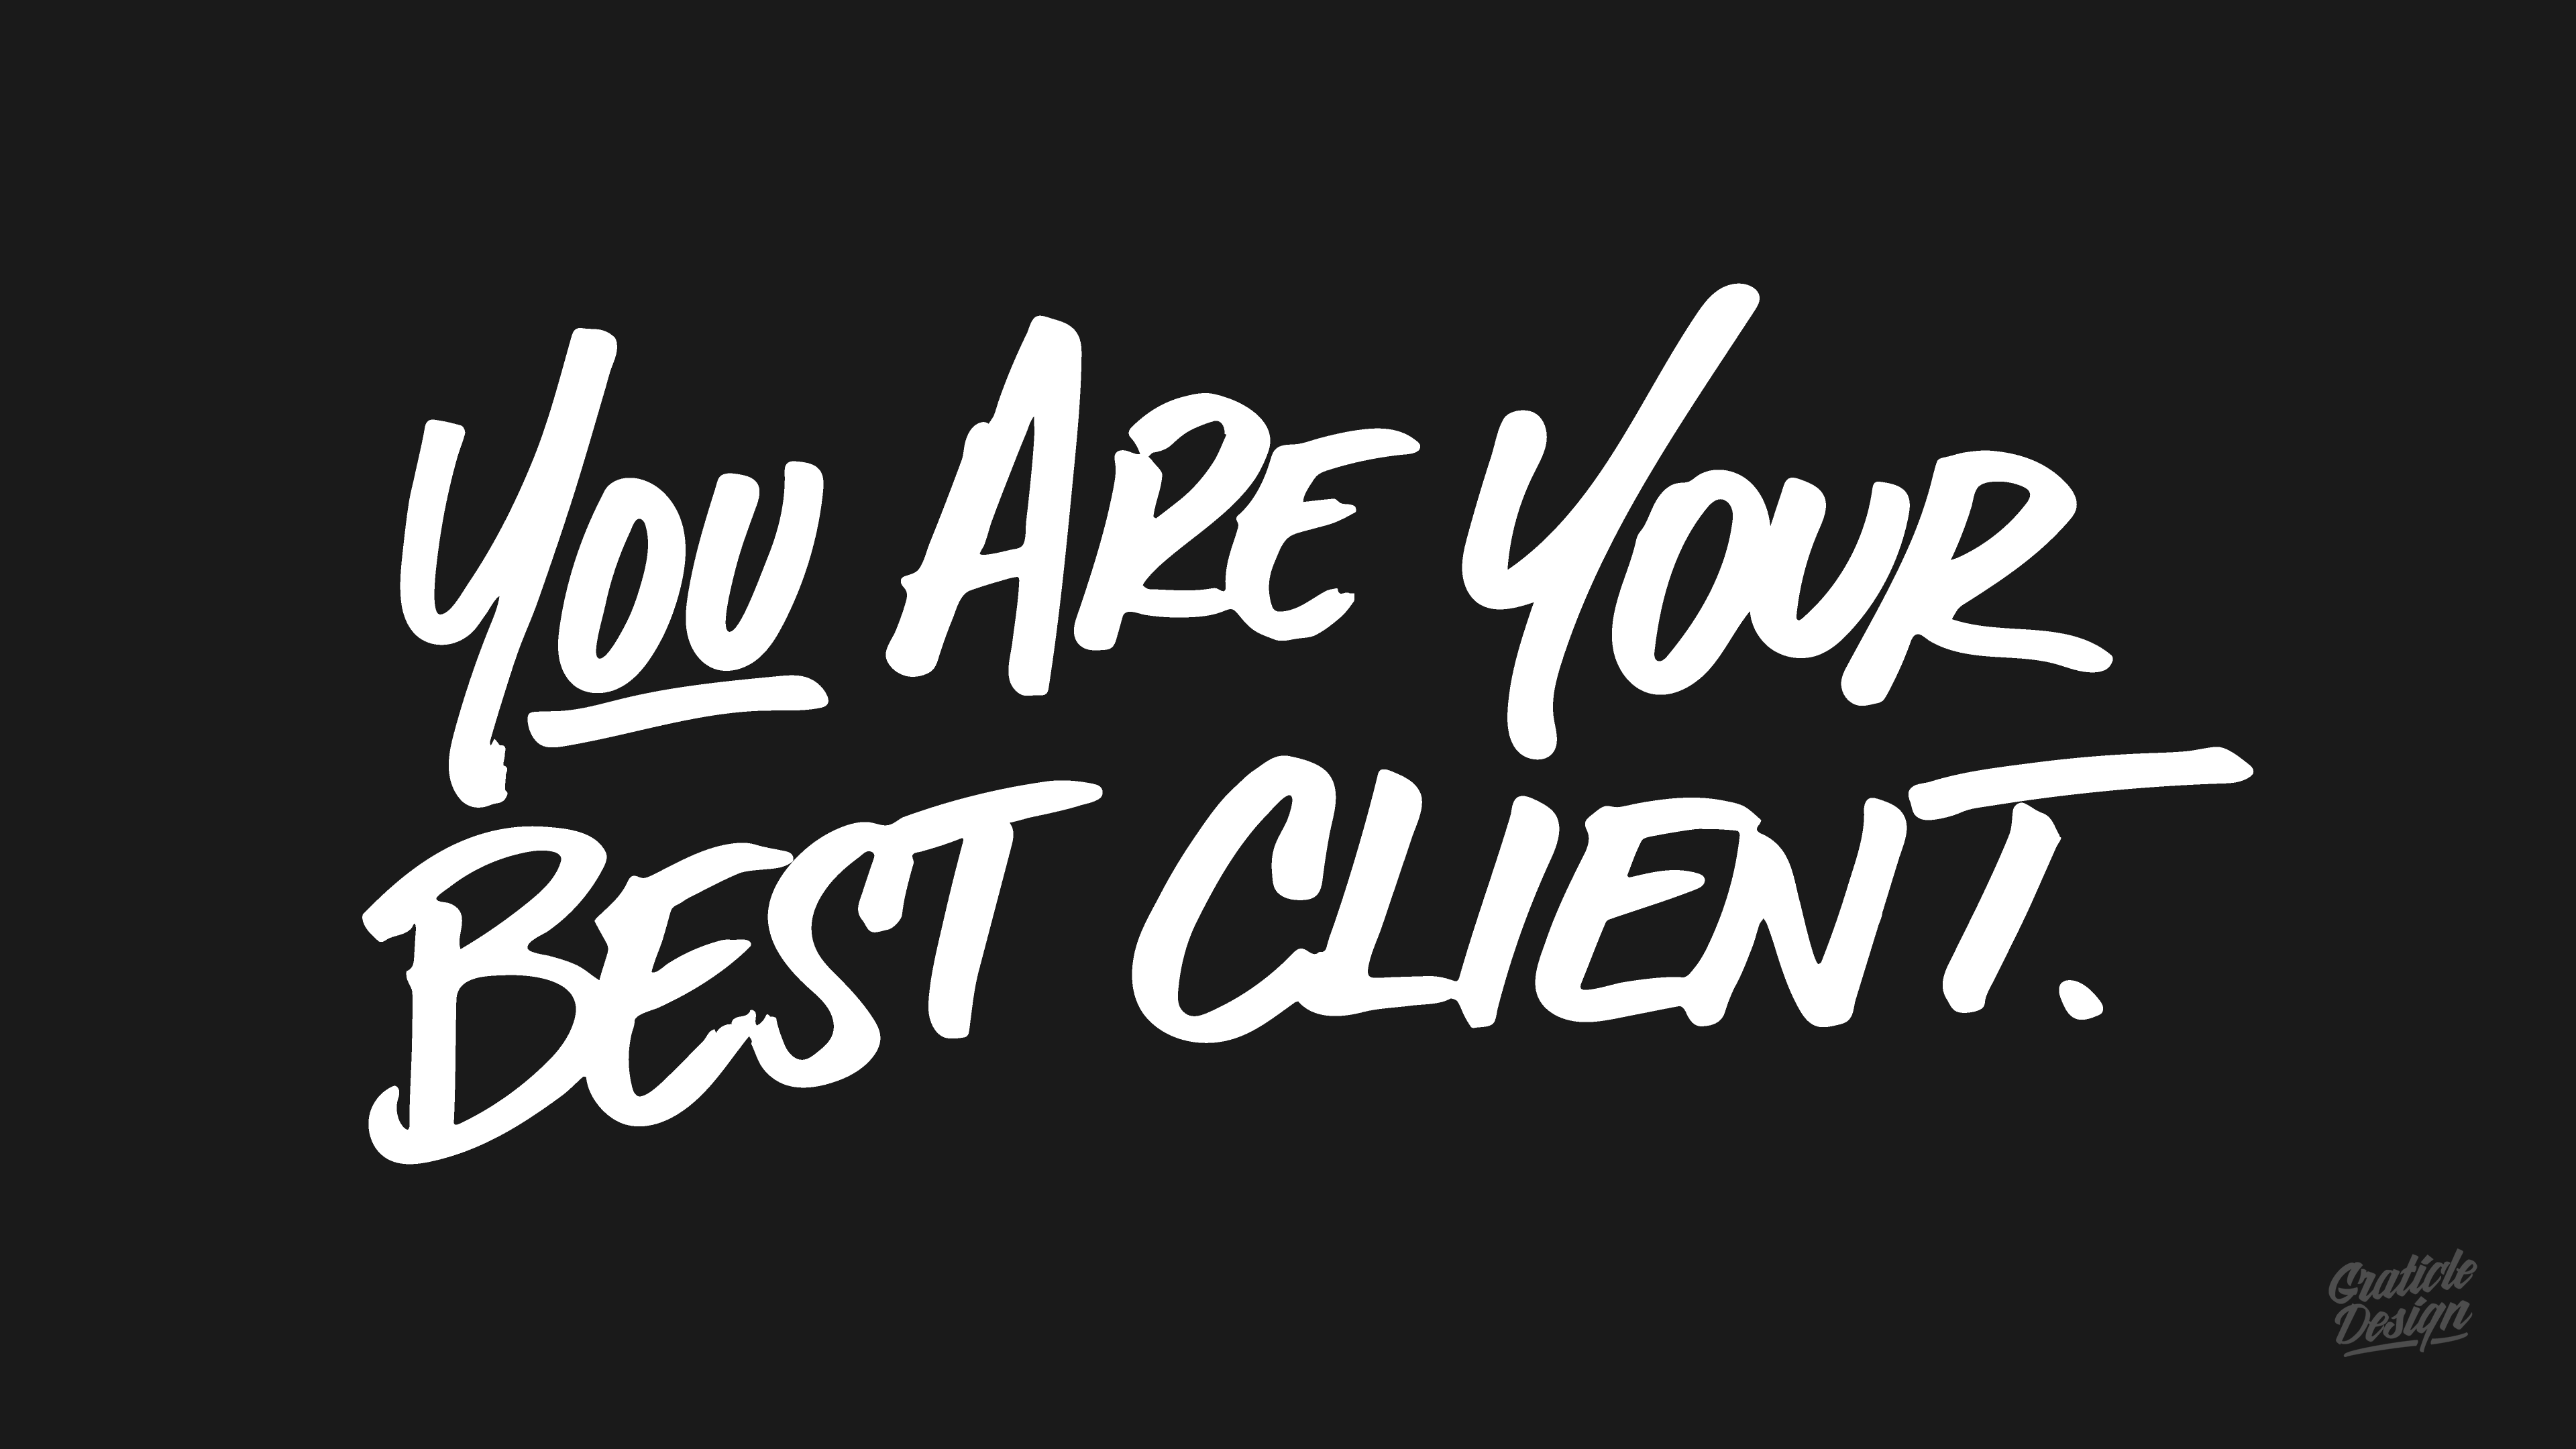 You Are Your Best Client - by Graticle Design